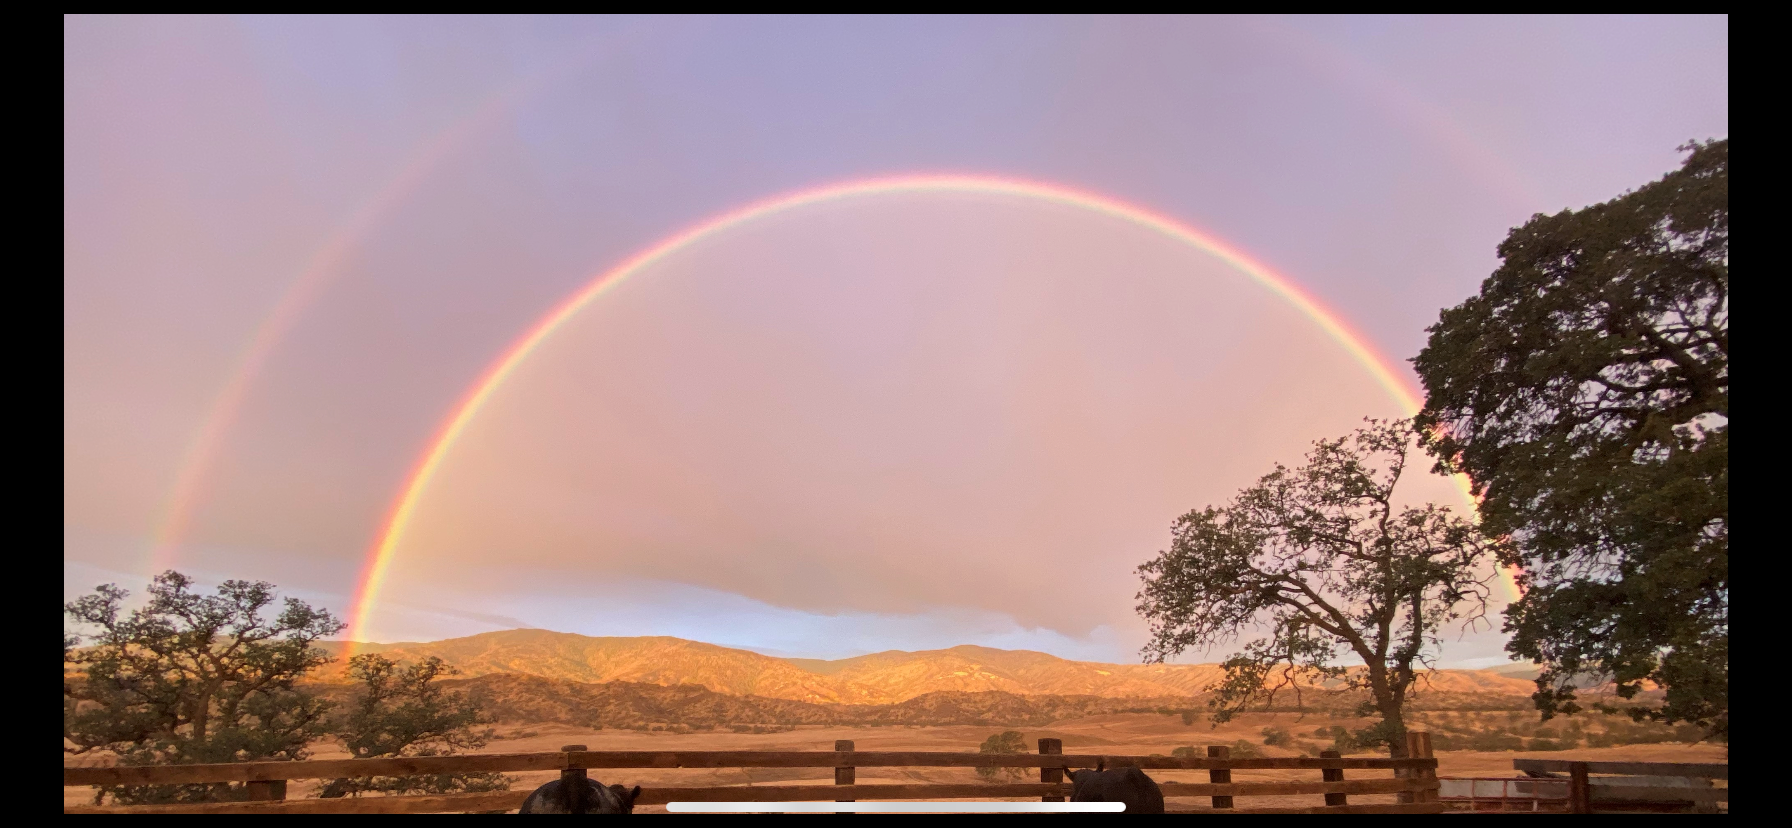 Photo By: Tristen Groteguth March 17, 2022 - Double rainbow over golden fields and mountains